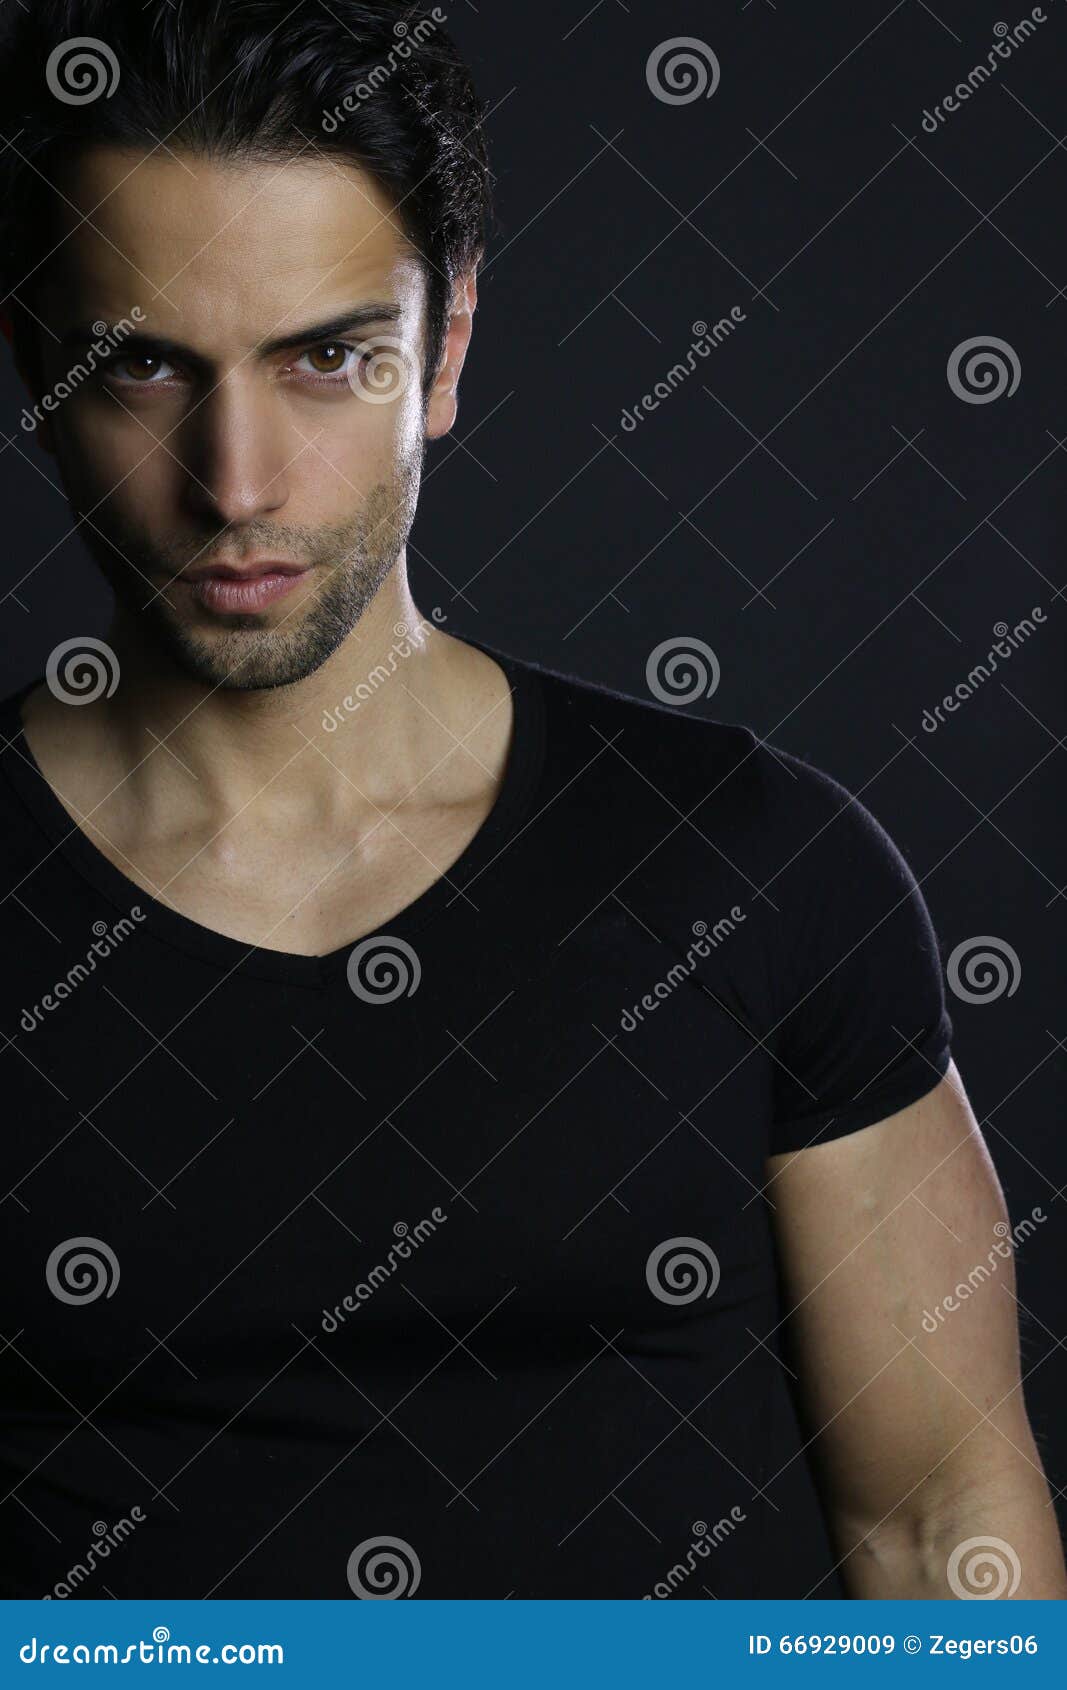 Handsome confident man stock image. Image of young, caucasian - 66929009